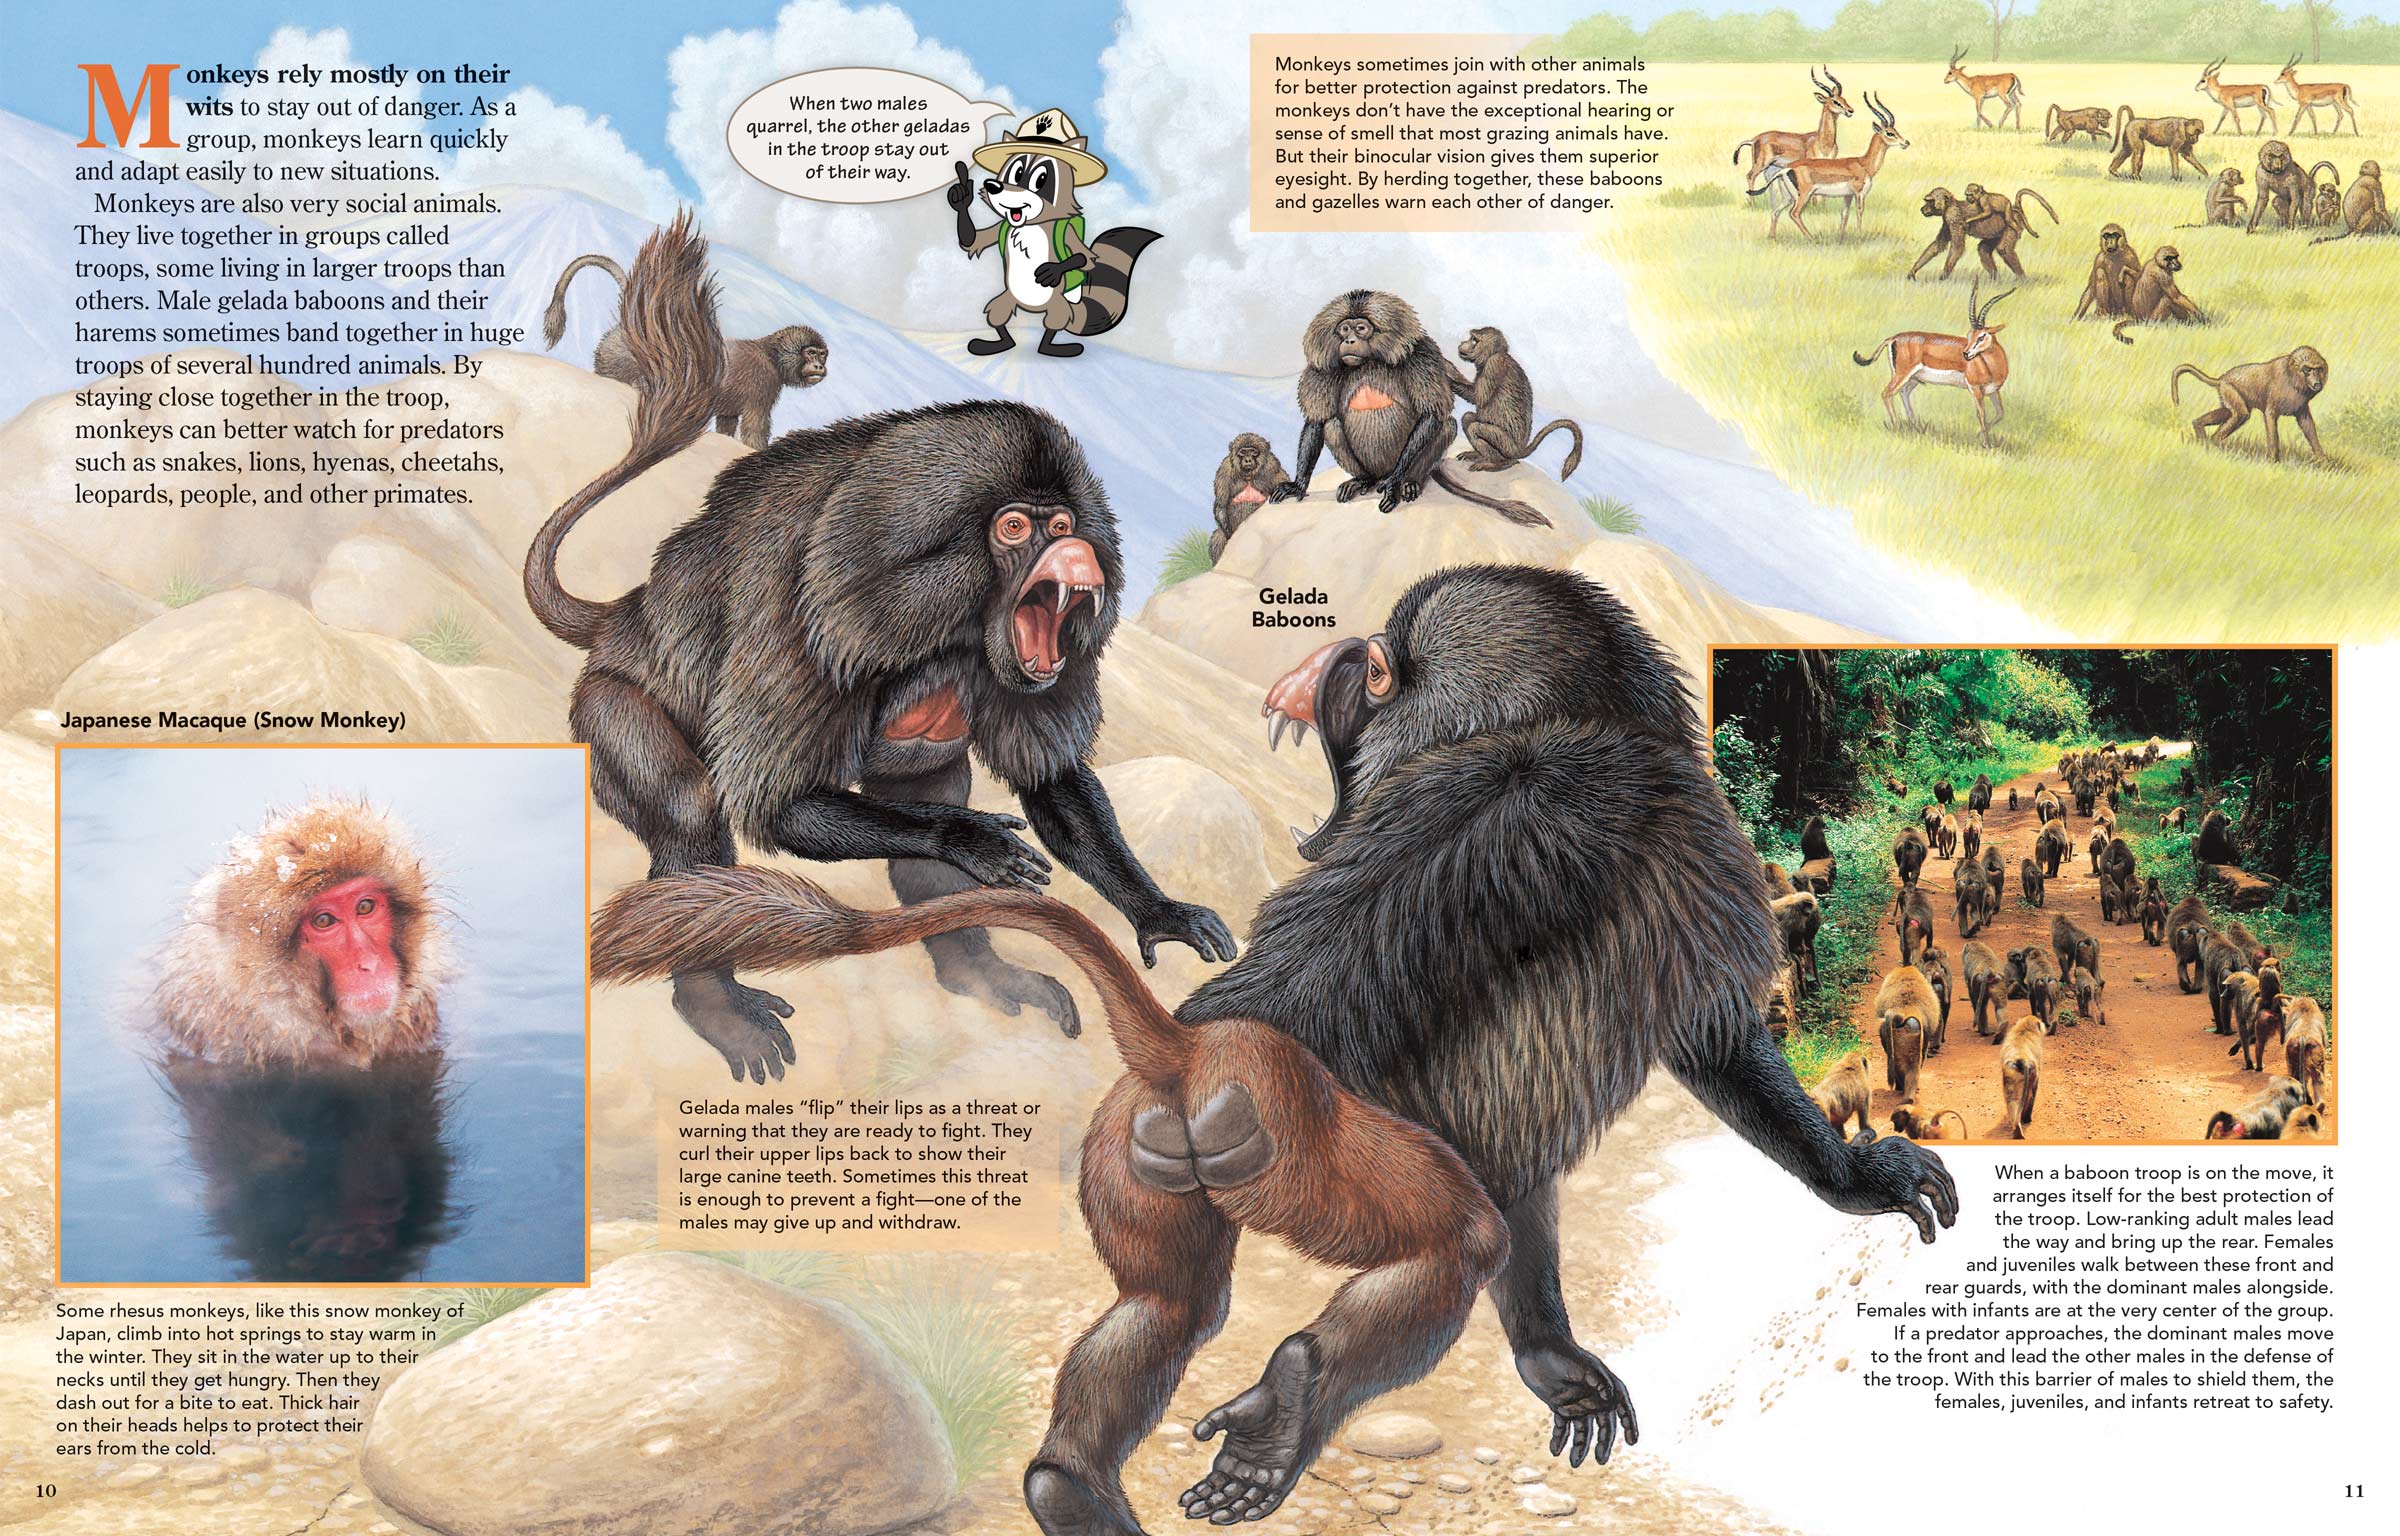 Main art shows gelada baboons fighting. Other images demonstrate how monkeys protect themselves.